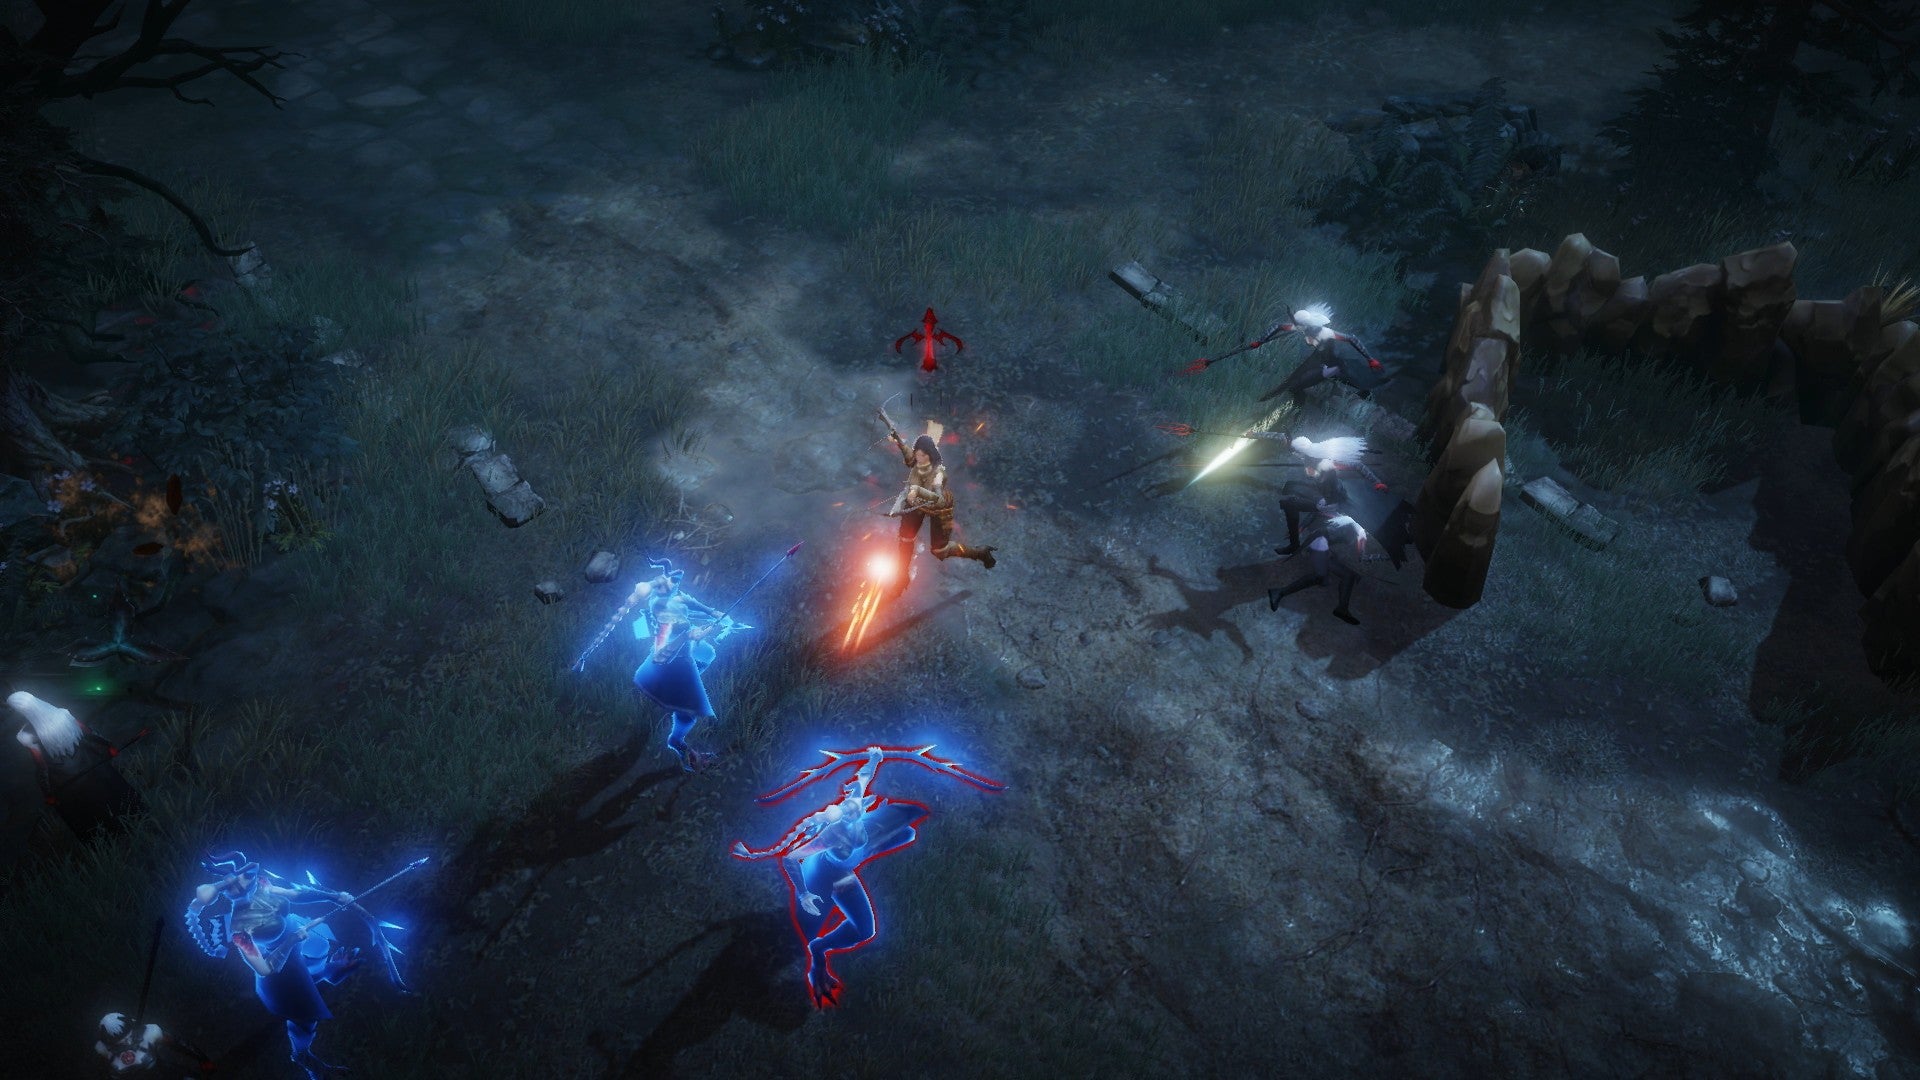 Diablo Immortal's Demon Hunter killing blue spectral enemies with a crossbow on a murky dirt path.